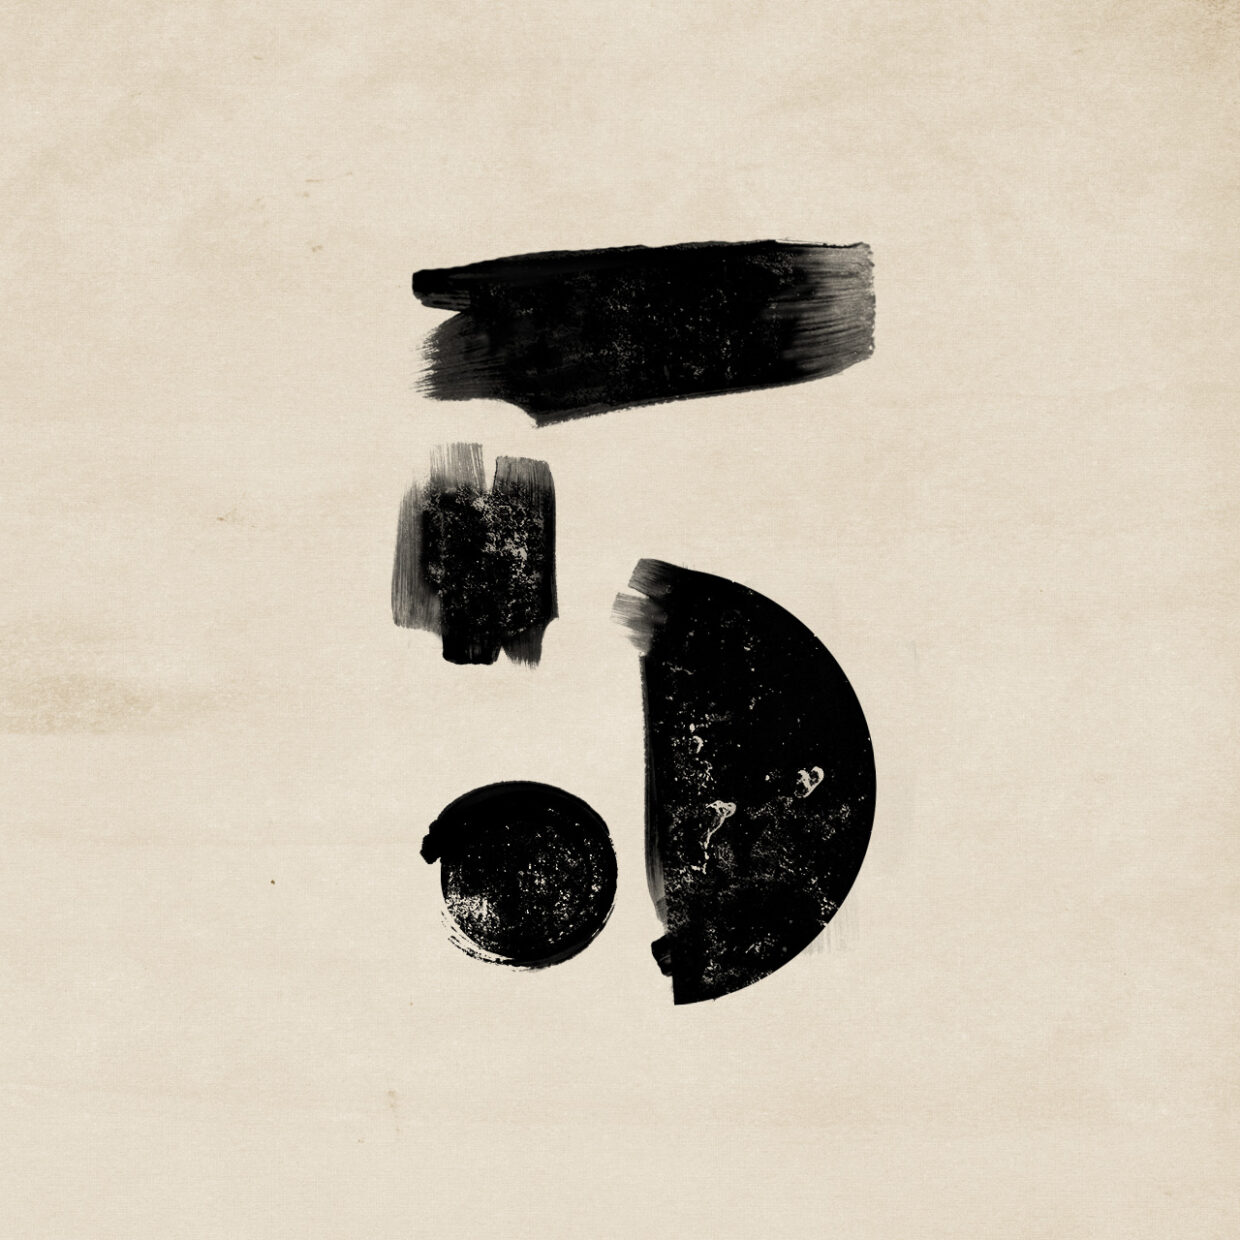 Illustration of the number five made with brushstrokes